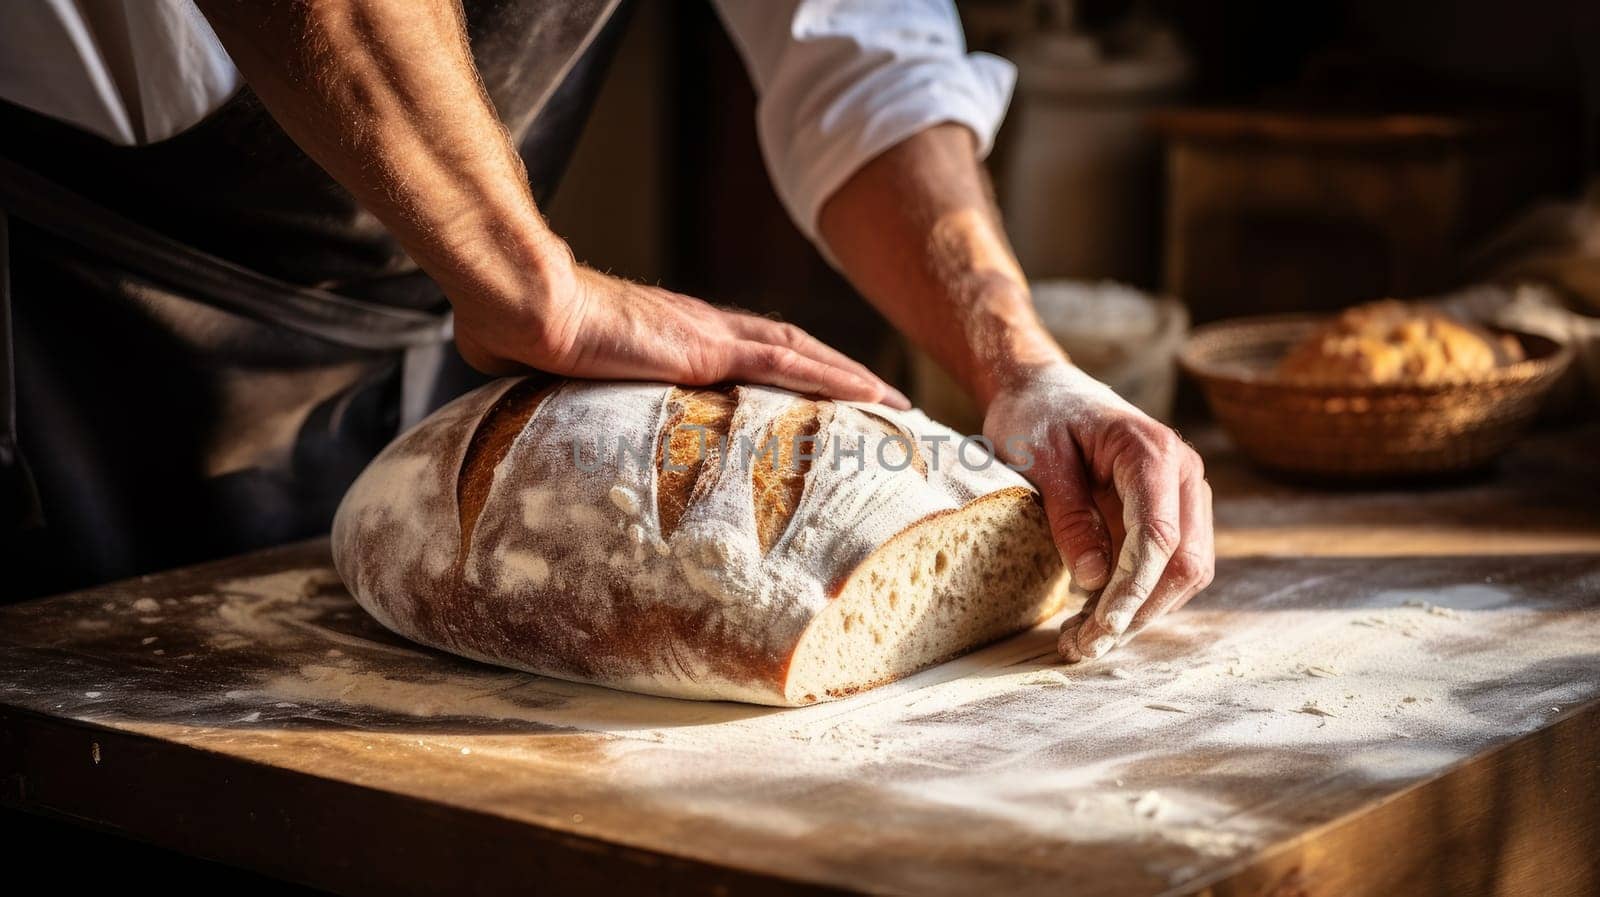 Baker's hands make Fresh aromatic bread with flour and dough on a wooden cutting board and wheat. Fresh classic pastries. Delicious food concept, private bakery, small business, self-employed, small business in the city, cozy place for communication